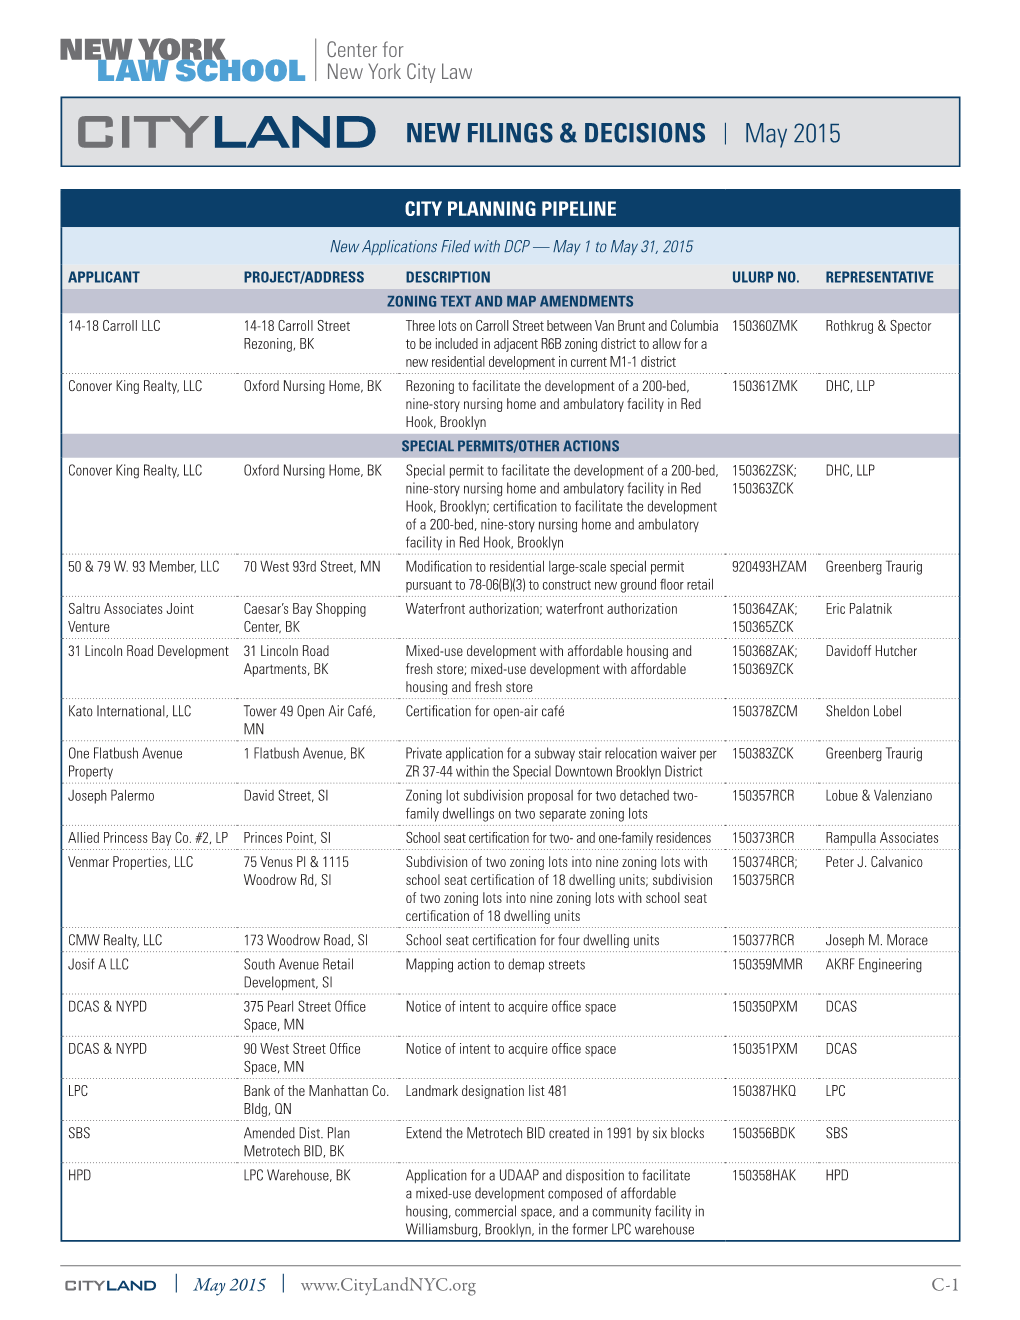 CITYLAND NEW FILINGS & DECISIONS | May 2015